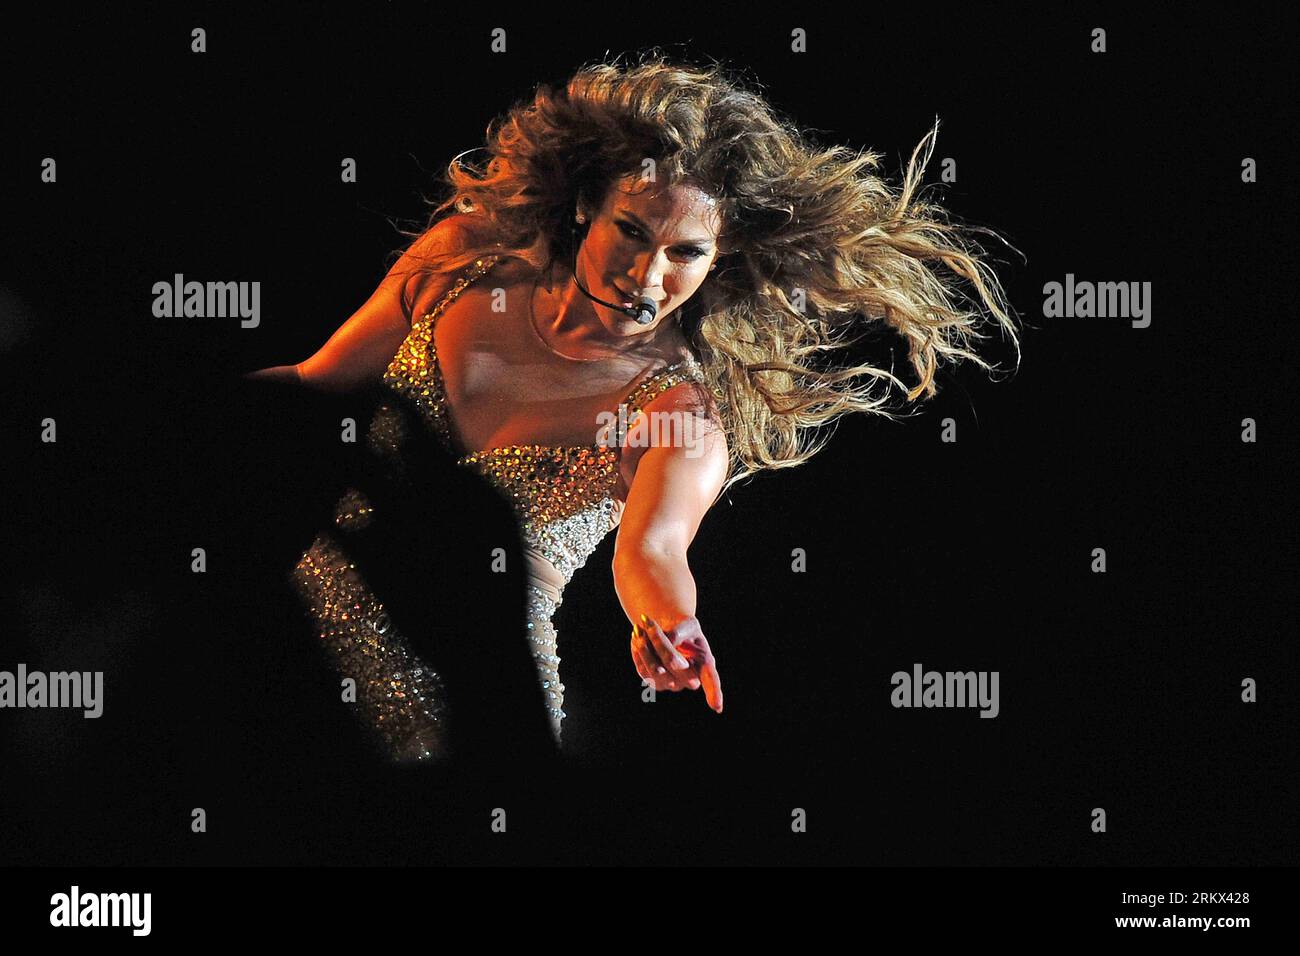 Bildnummer: 58874617  Datum: 04.12.2012  Copyright: imago/Xinhua American singer Jennifer Lopez (JLo) performs during her Dance Again World Tour concert held in Singapore s Gardens by the Bay on December 4, 2012. By Xinhua, Then Chih Wey SINGAPORE-CONCERT-JENNIFER LOPEZ PUBLICATIONxNOTxINxCHN People Entertainment Kultur Musik Aktion Singapur xdp x0x premiumd 2012 quer premiumd      58874617 Date 04 12 2012 Copyright Imago XINHUA American Singer Jennifer Lopez JLO performs during her Dance Again World Tour Concert Hero in Singapore S Gardens by The Bay ON December 4 2012 by XINHUA Then Chih Wey Stock Photo